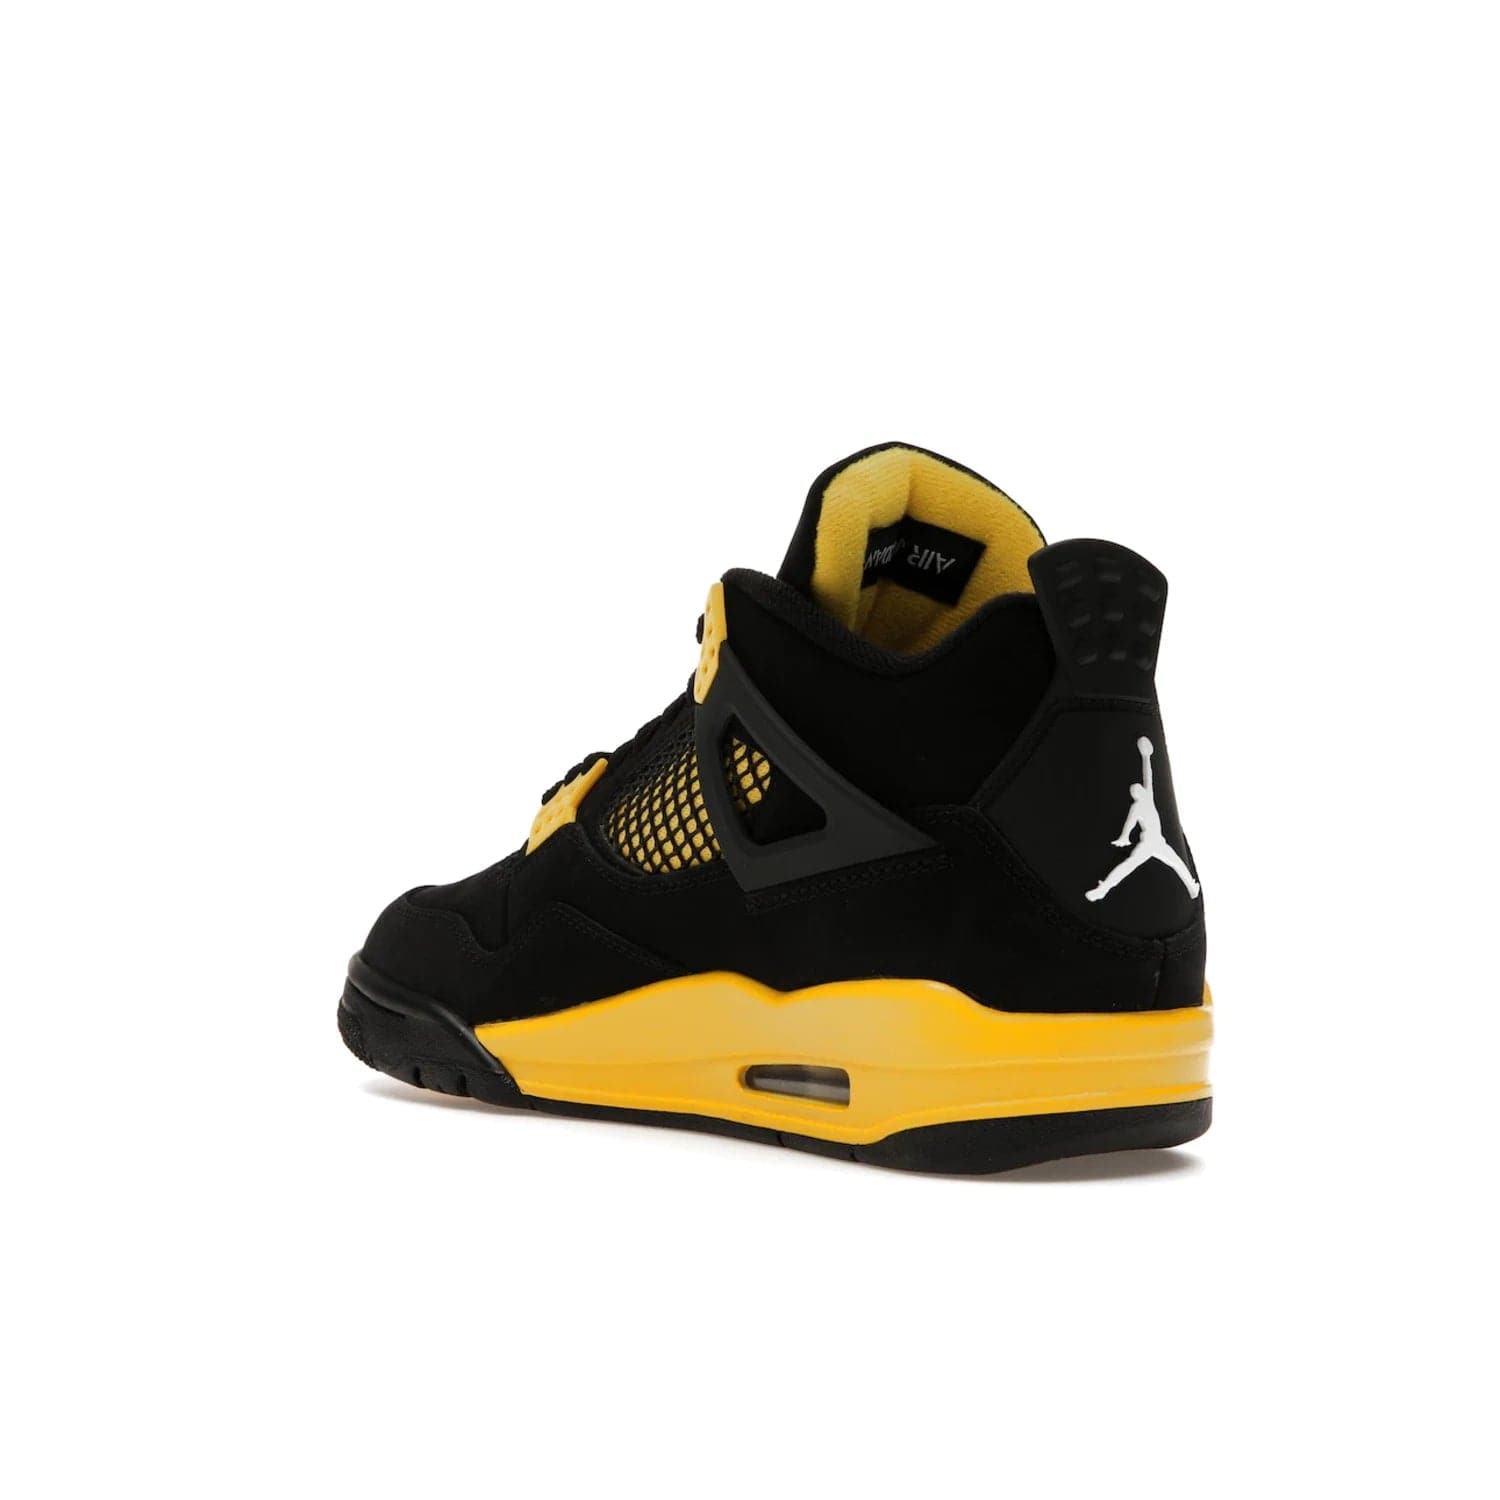 Jordan 4 Retro Thunder (2023) - Image 24 - Only at www.BallersClubKickz.com - Iconic Air Jordan 4 Retro Thunder (2023) returns with black nubuck upper and Tour Yellow details. Featuring Jumpman logo on heel tab, tongue and insoles. Dropping May 13th, 2023.